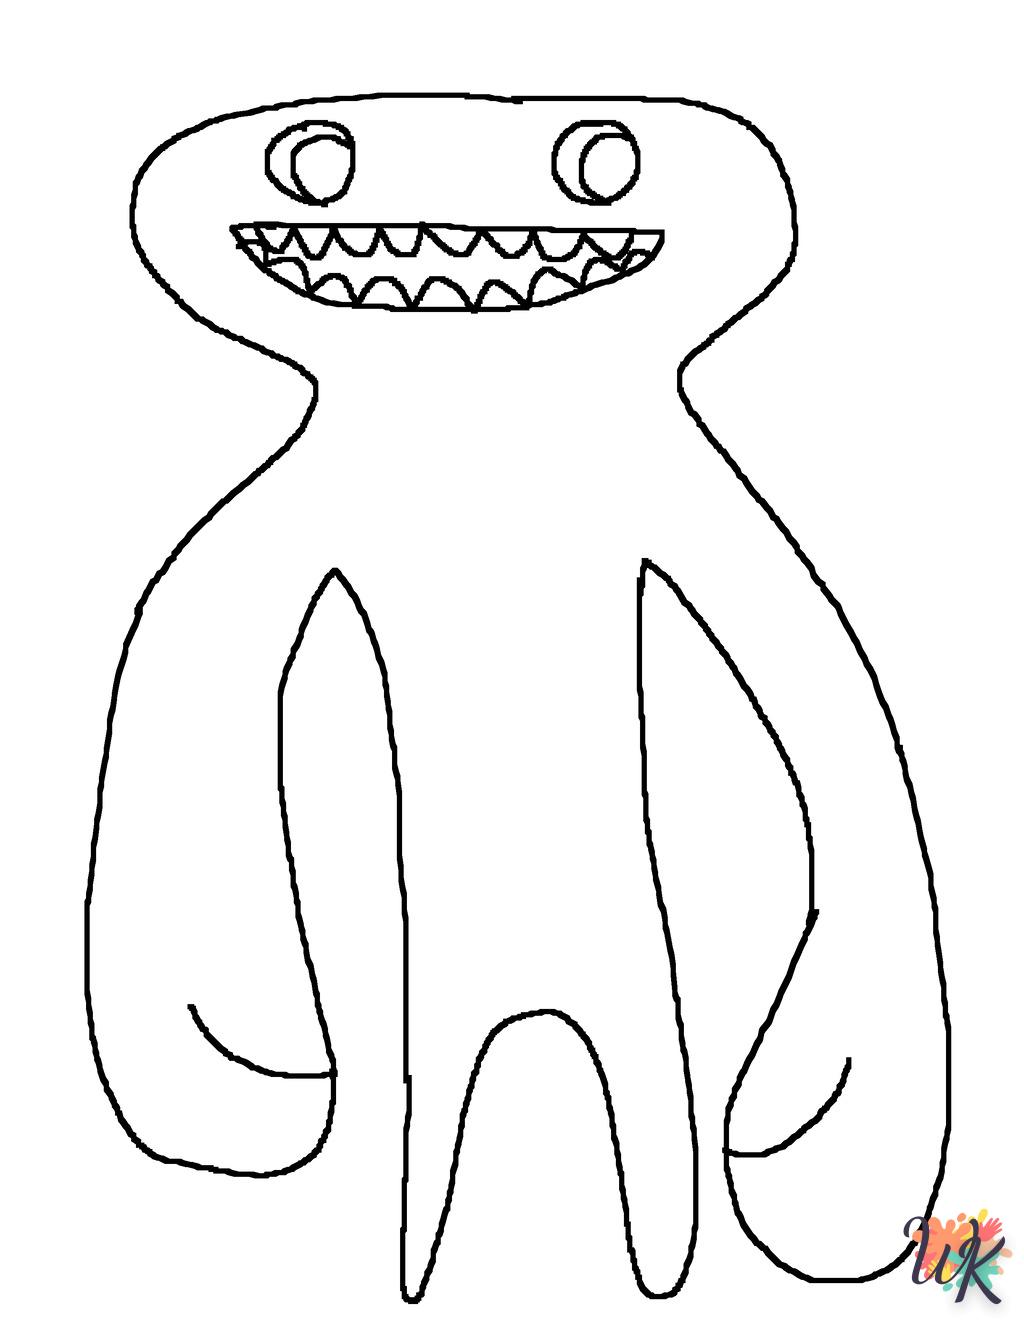 Garten Of Banban coloring pages for adults 1